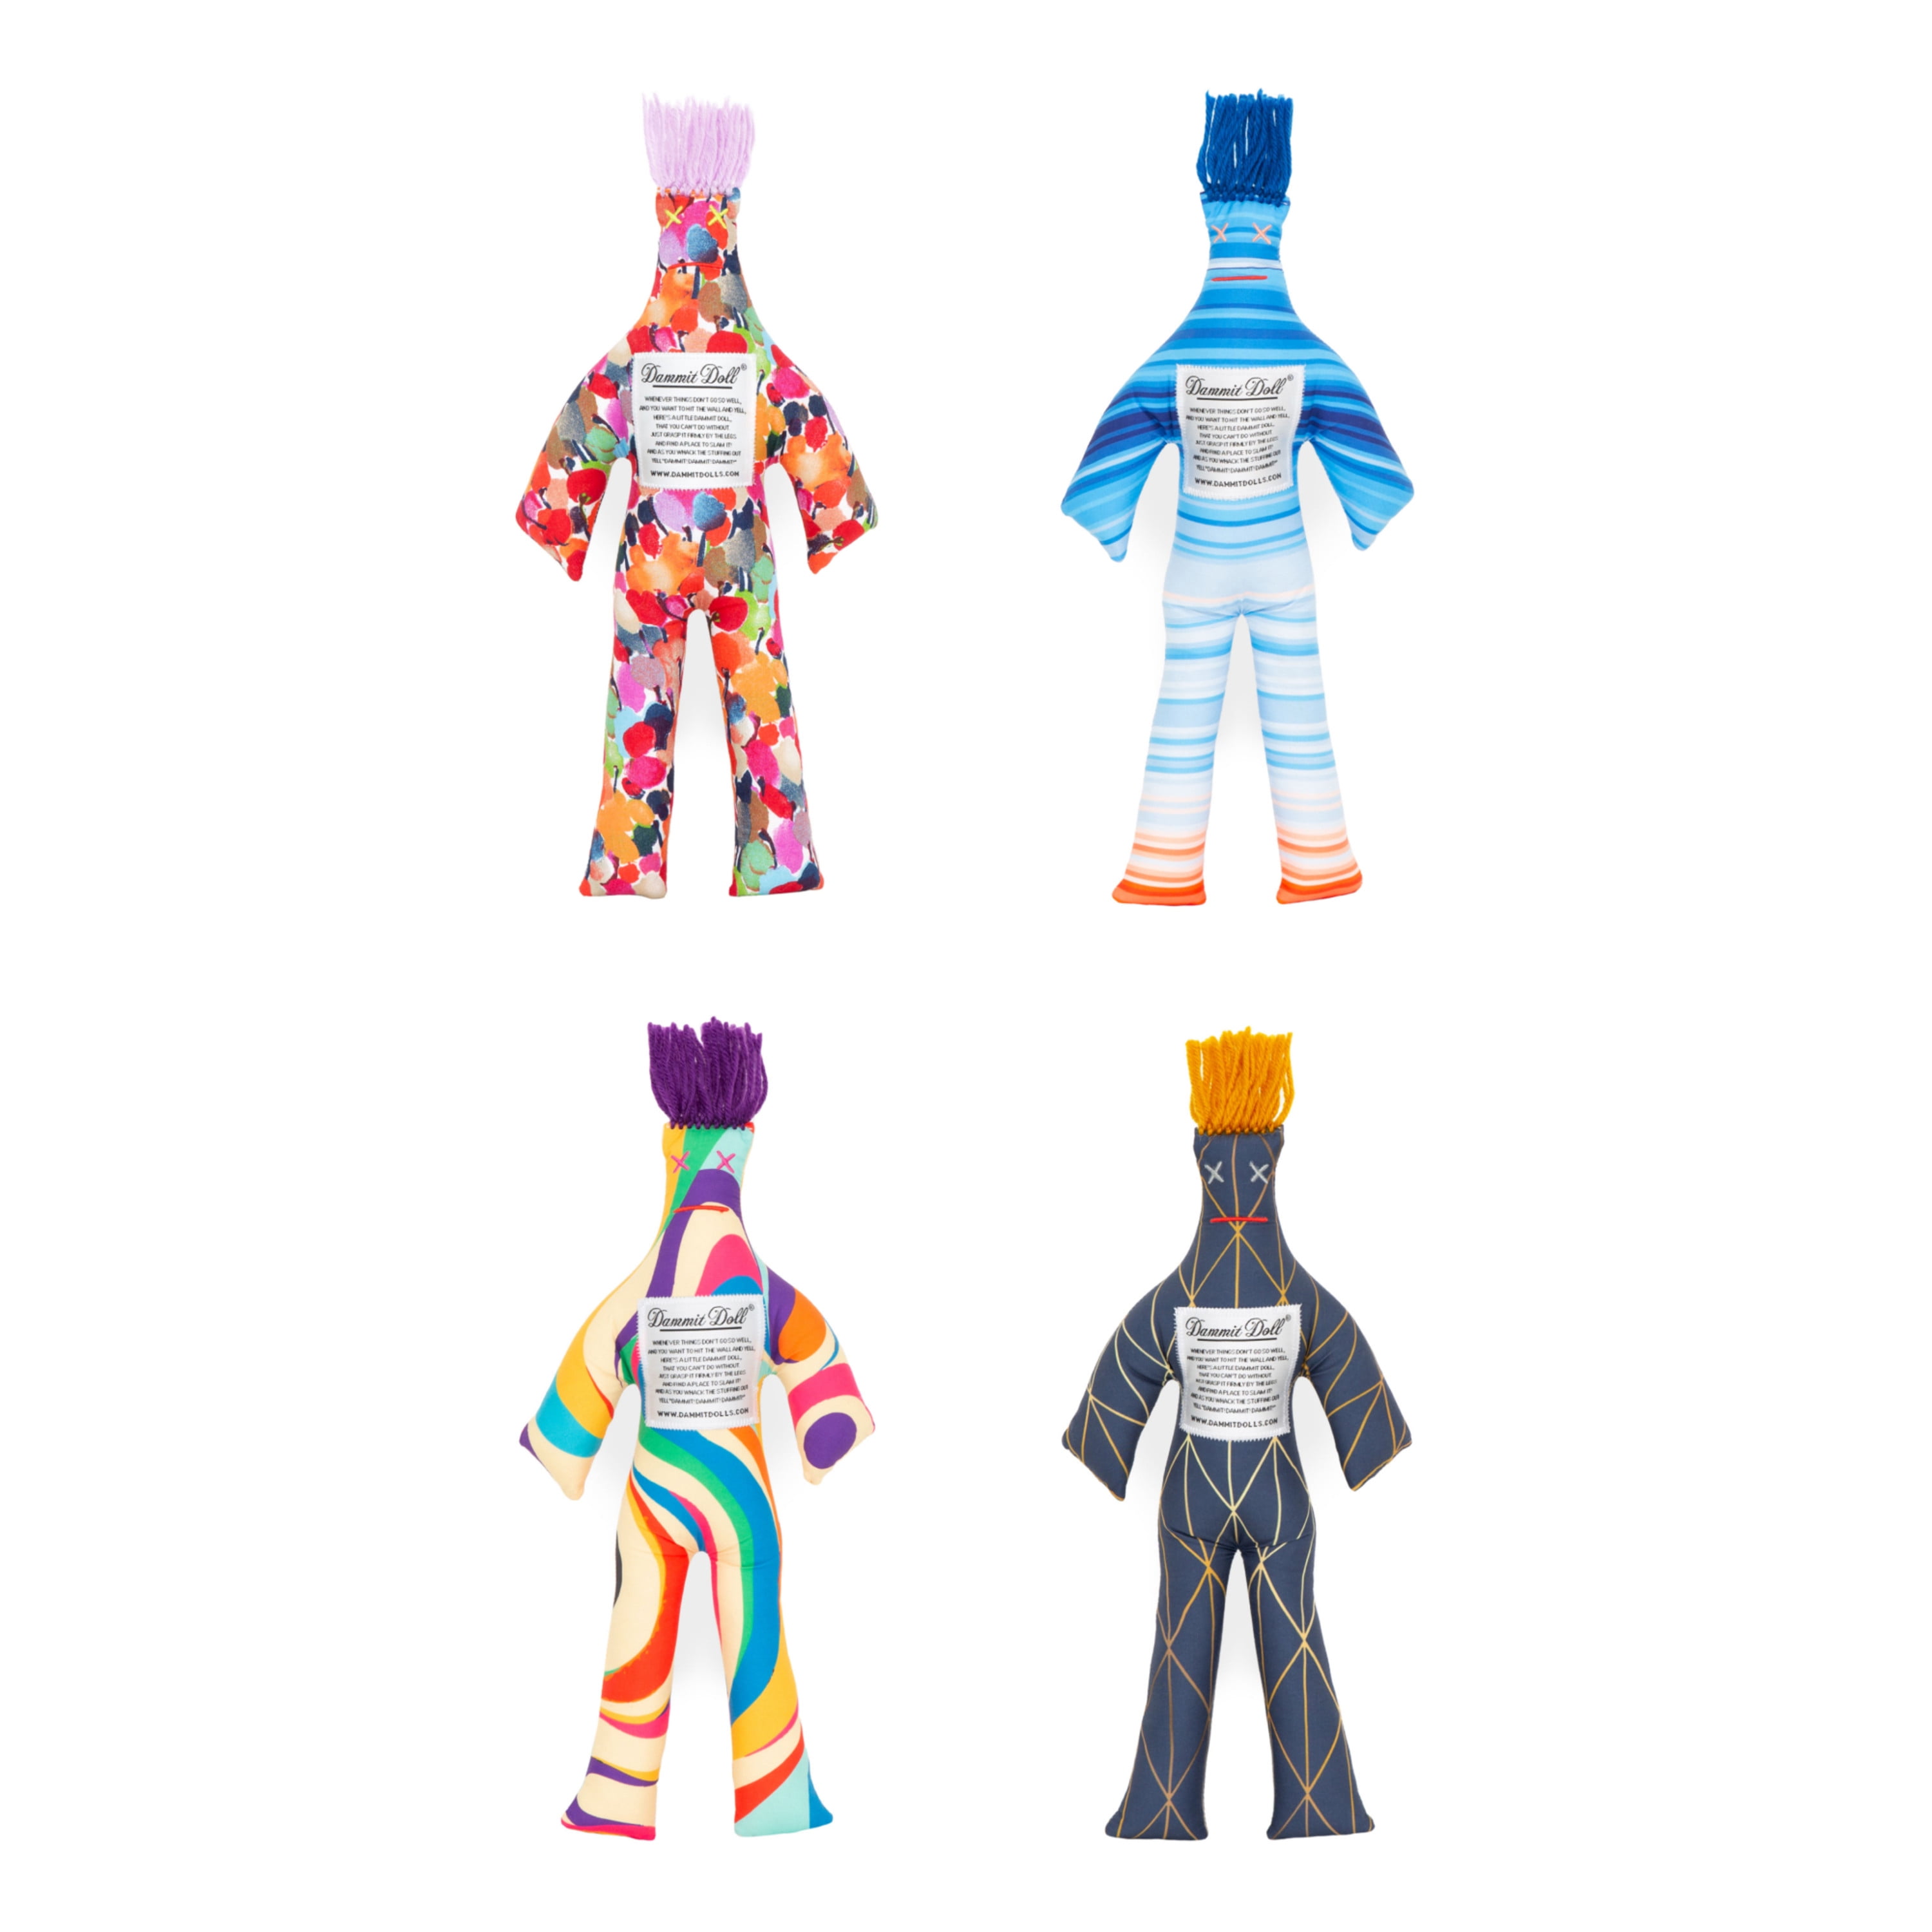 Dammit Dolls Sixpack, Set of 6 Dammit Doll, Stress Relief Toy, Gag Gifts